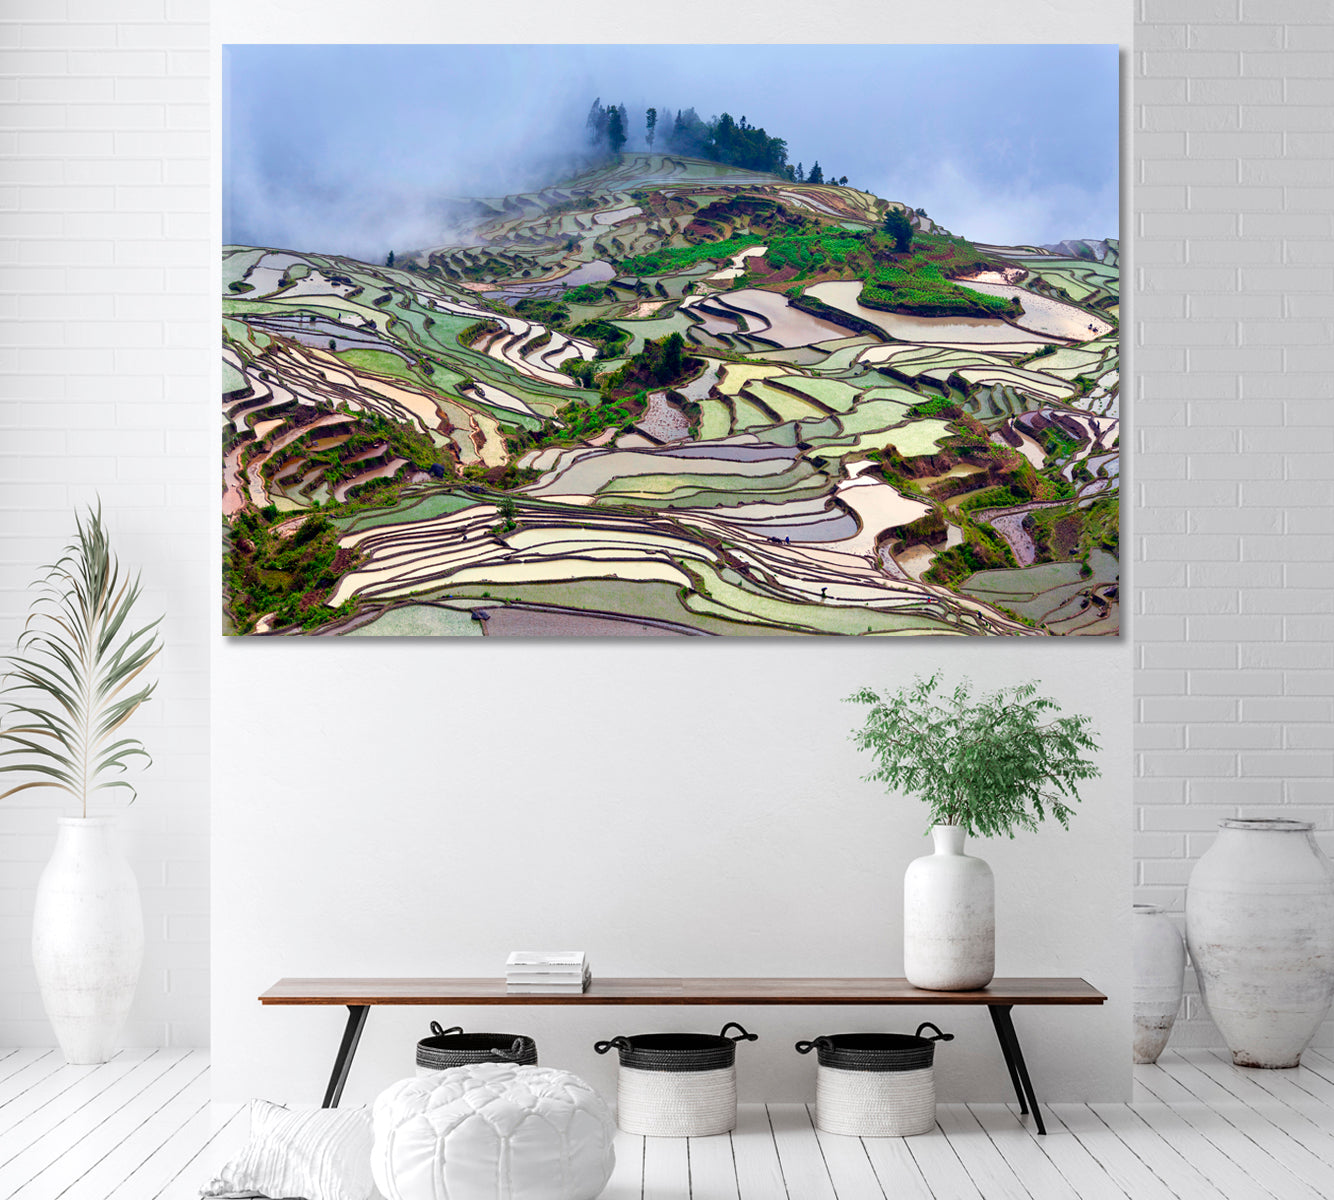 Terraced Rice Fields Yunnan China Canvas Print ArtLexy 1 Panel 24"x16" inches 